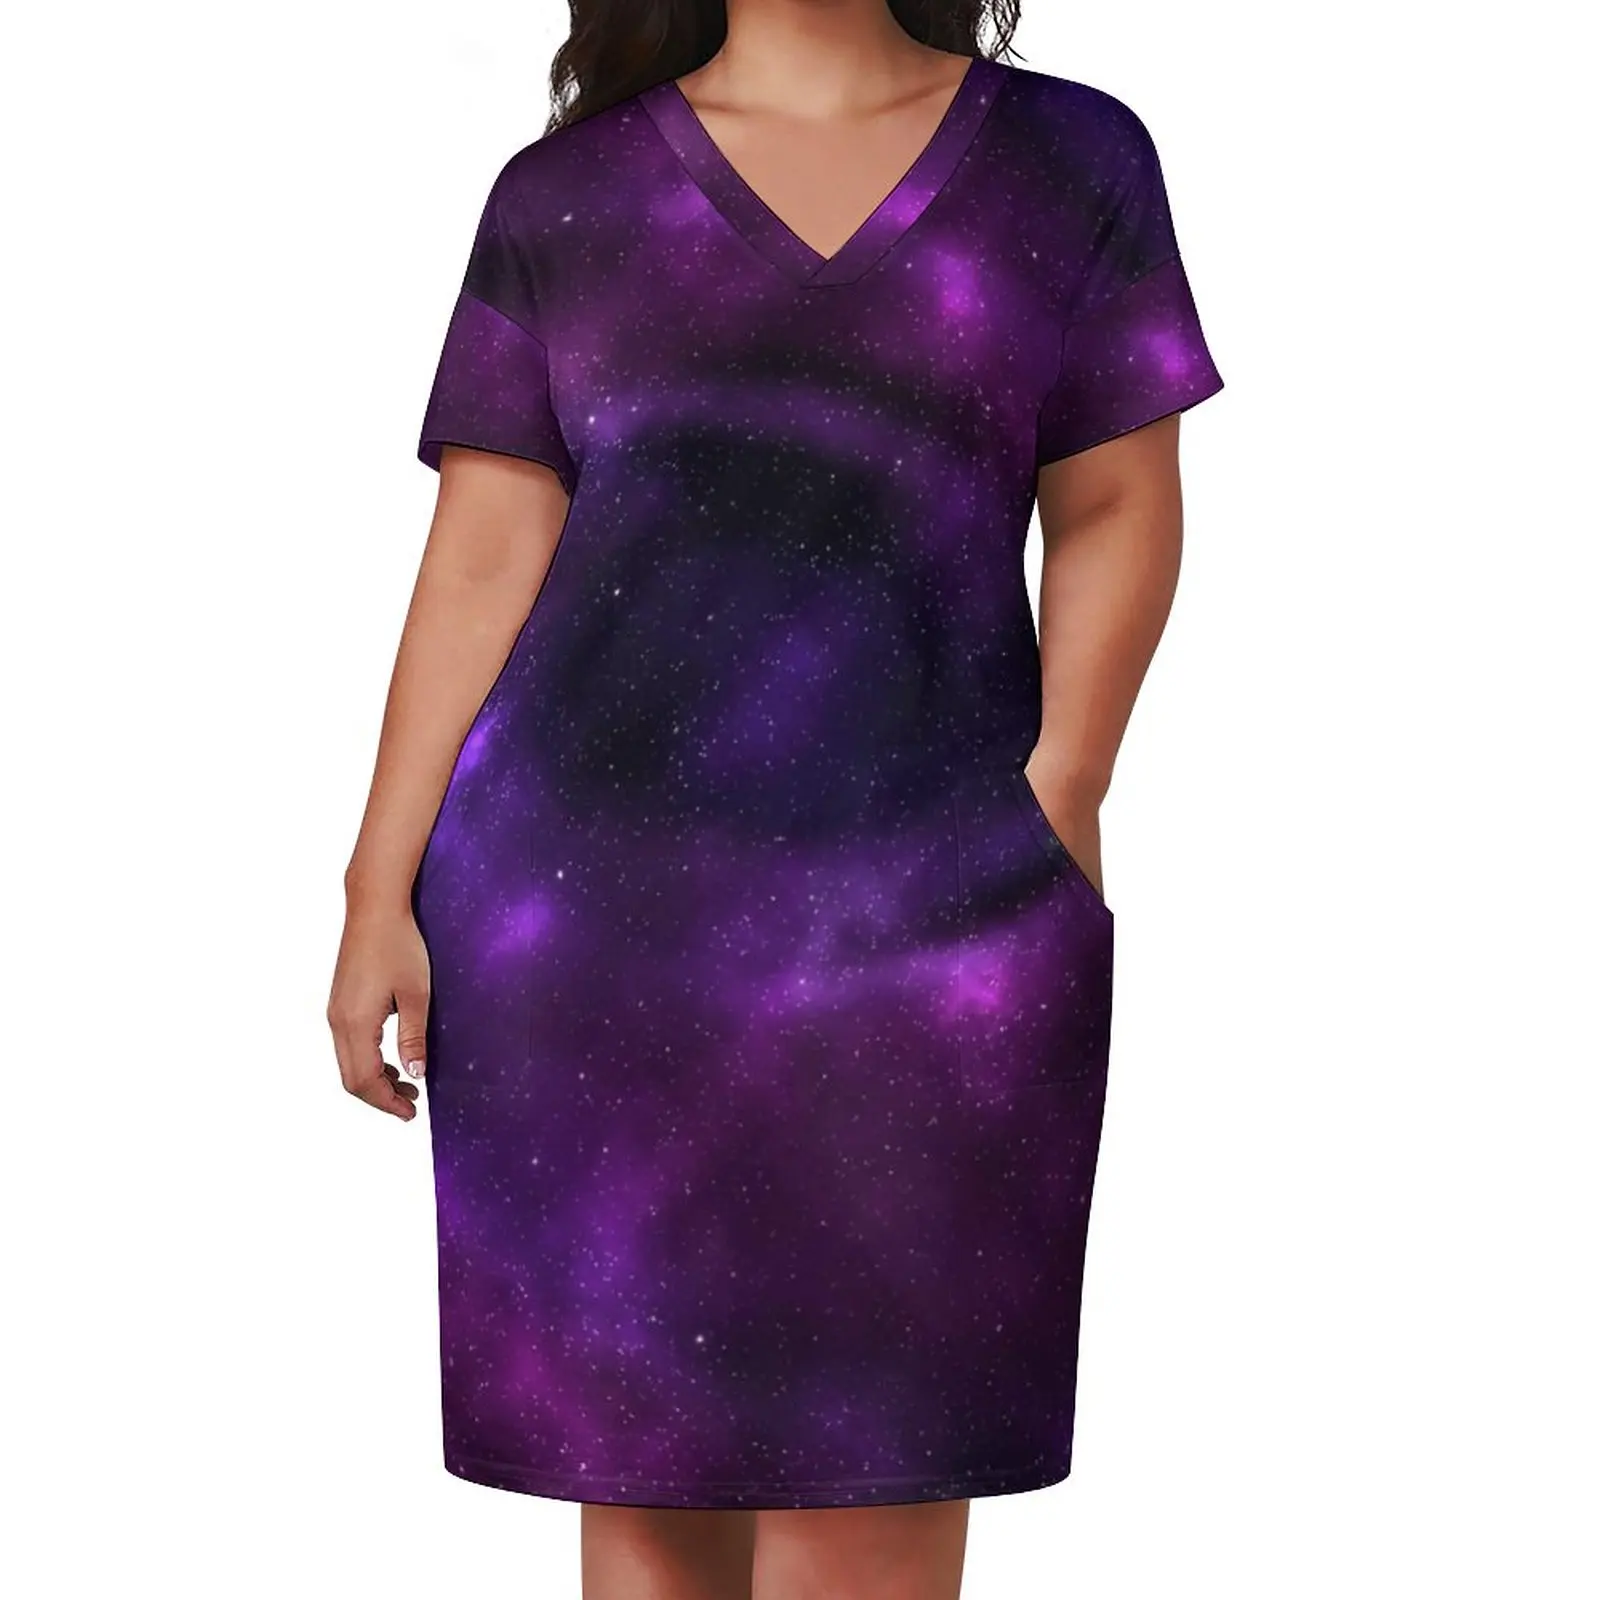 Spiral Galaxy Sky Dress V Neck Star Cluster Print Sexy Dresses Womens Street Style Casual Dress With Pockets Plus Size 3XL 4XL